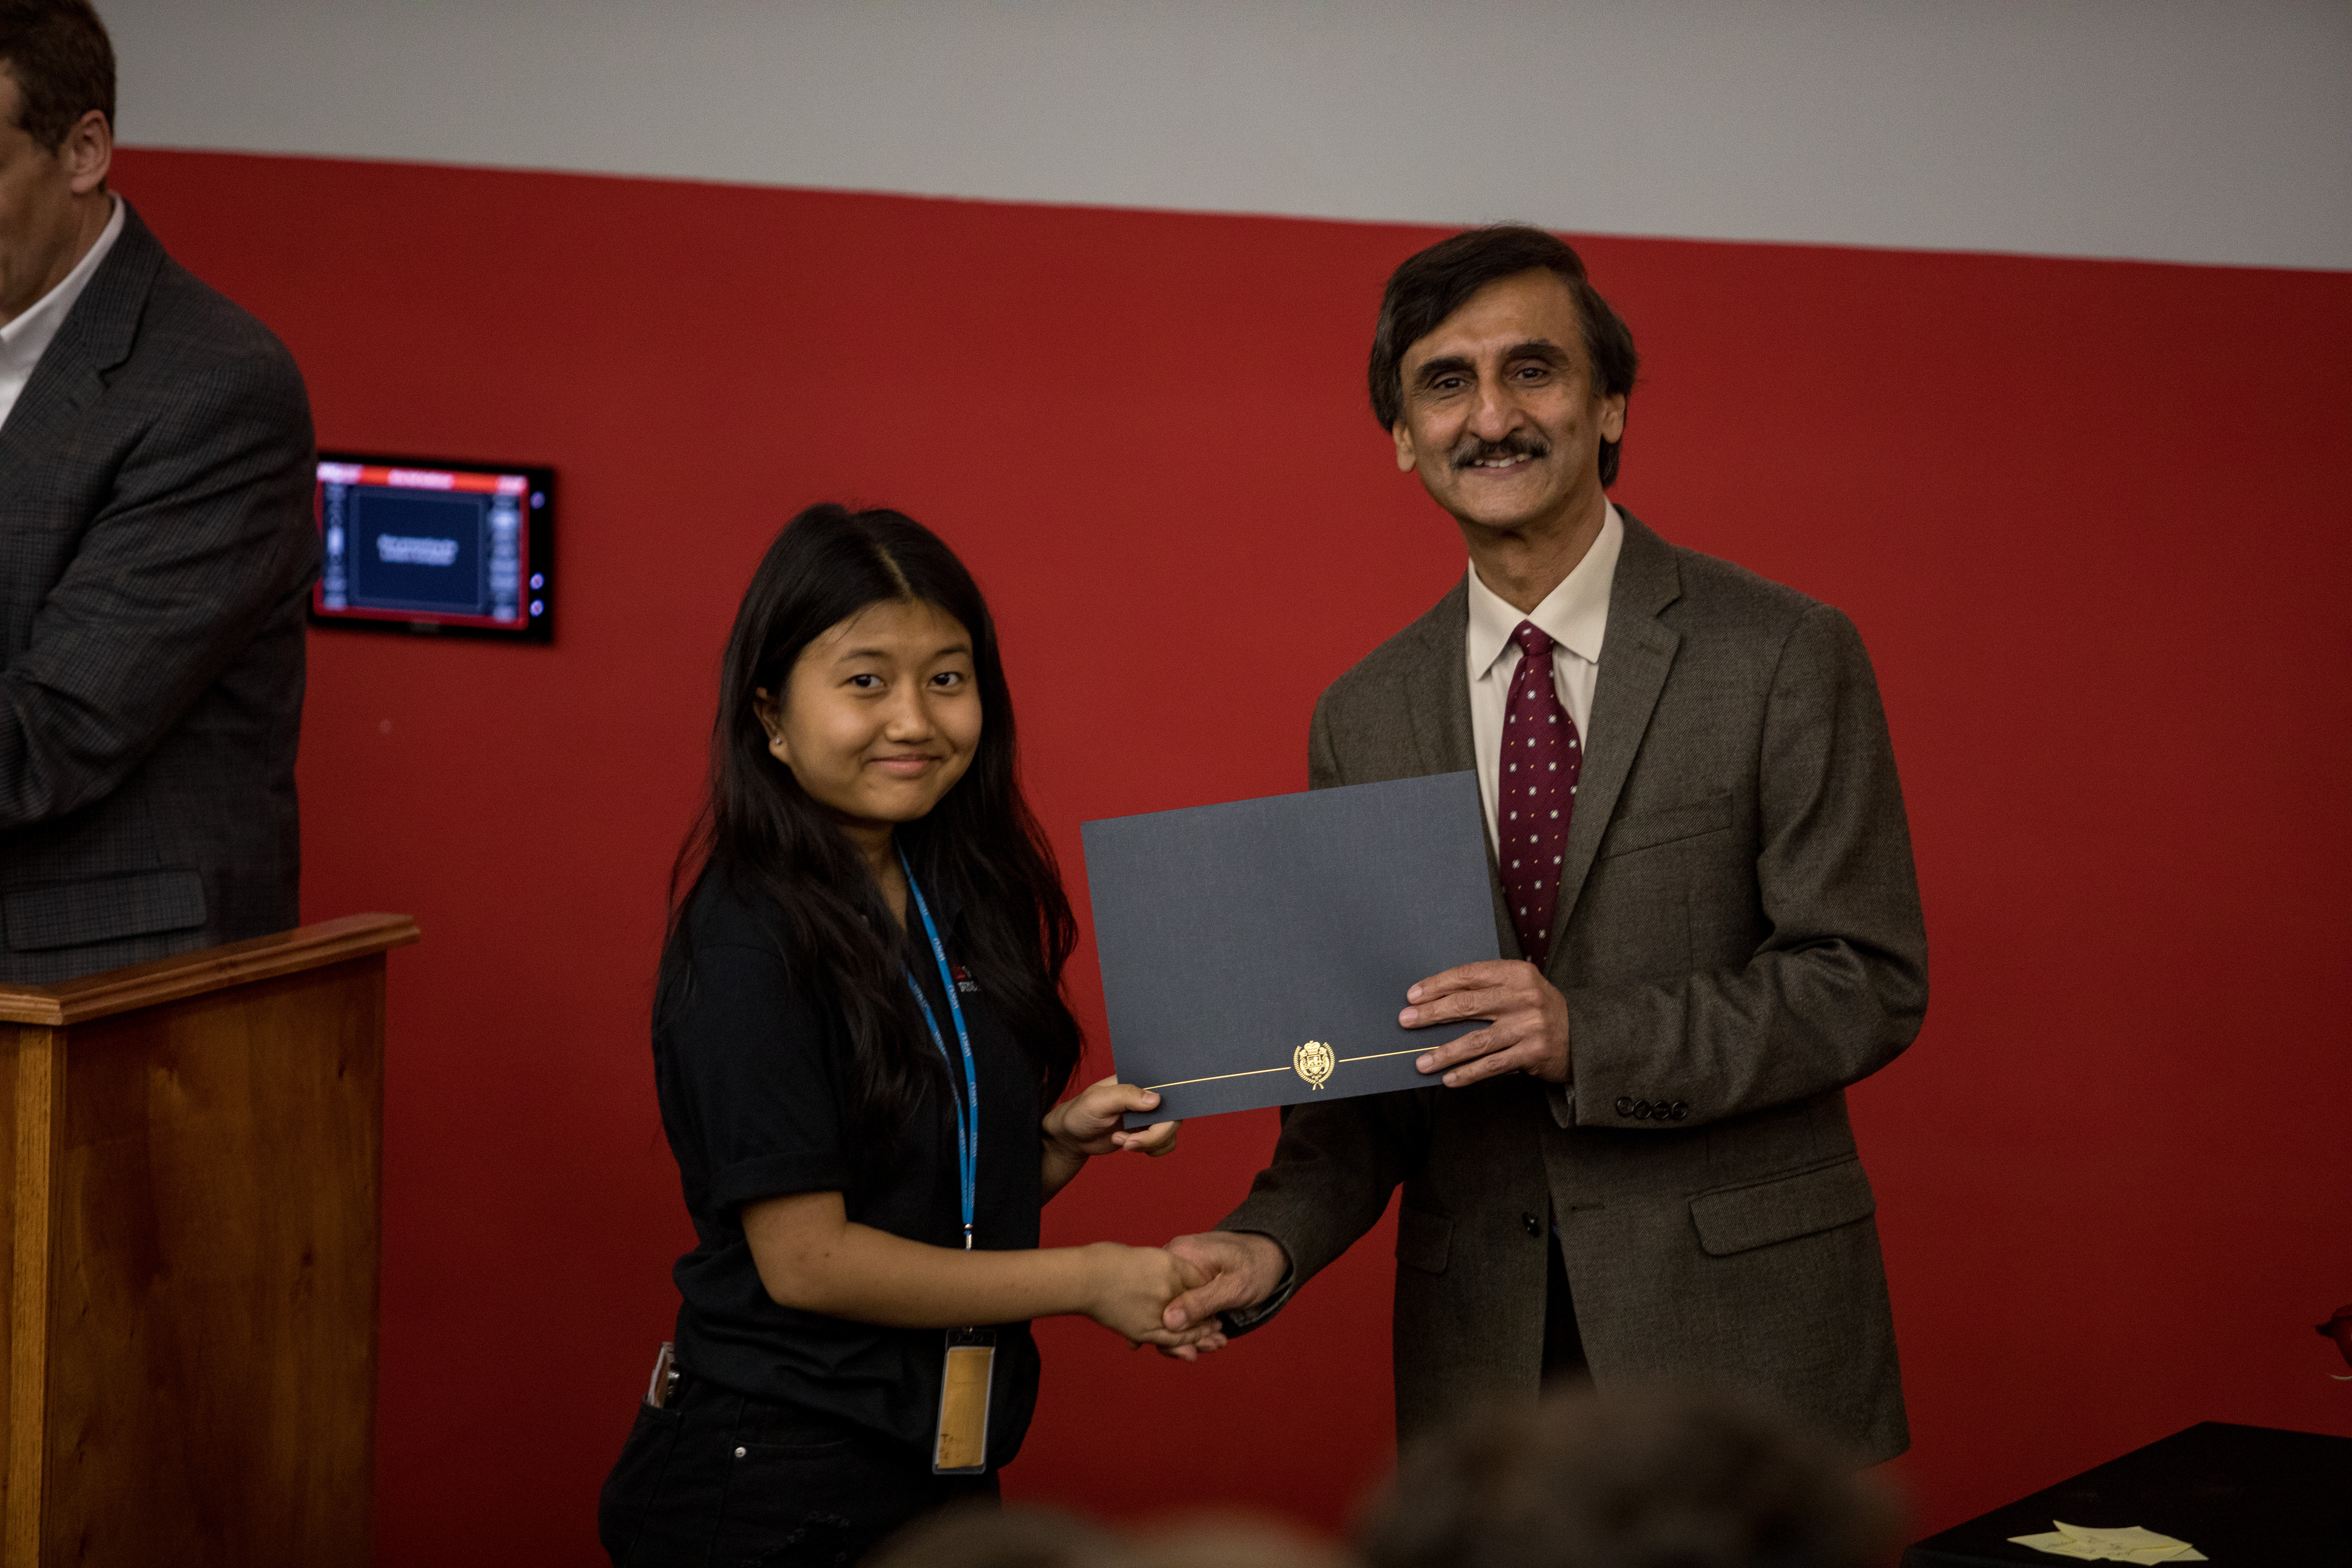 WKU Finance department head Dr. Chhachhi hands out award to a student at the camp award ceremony.